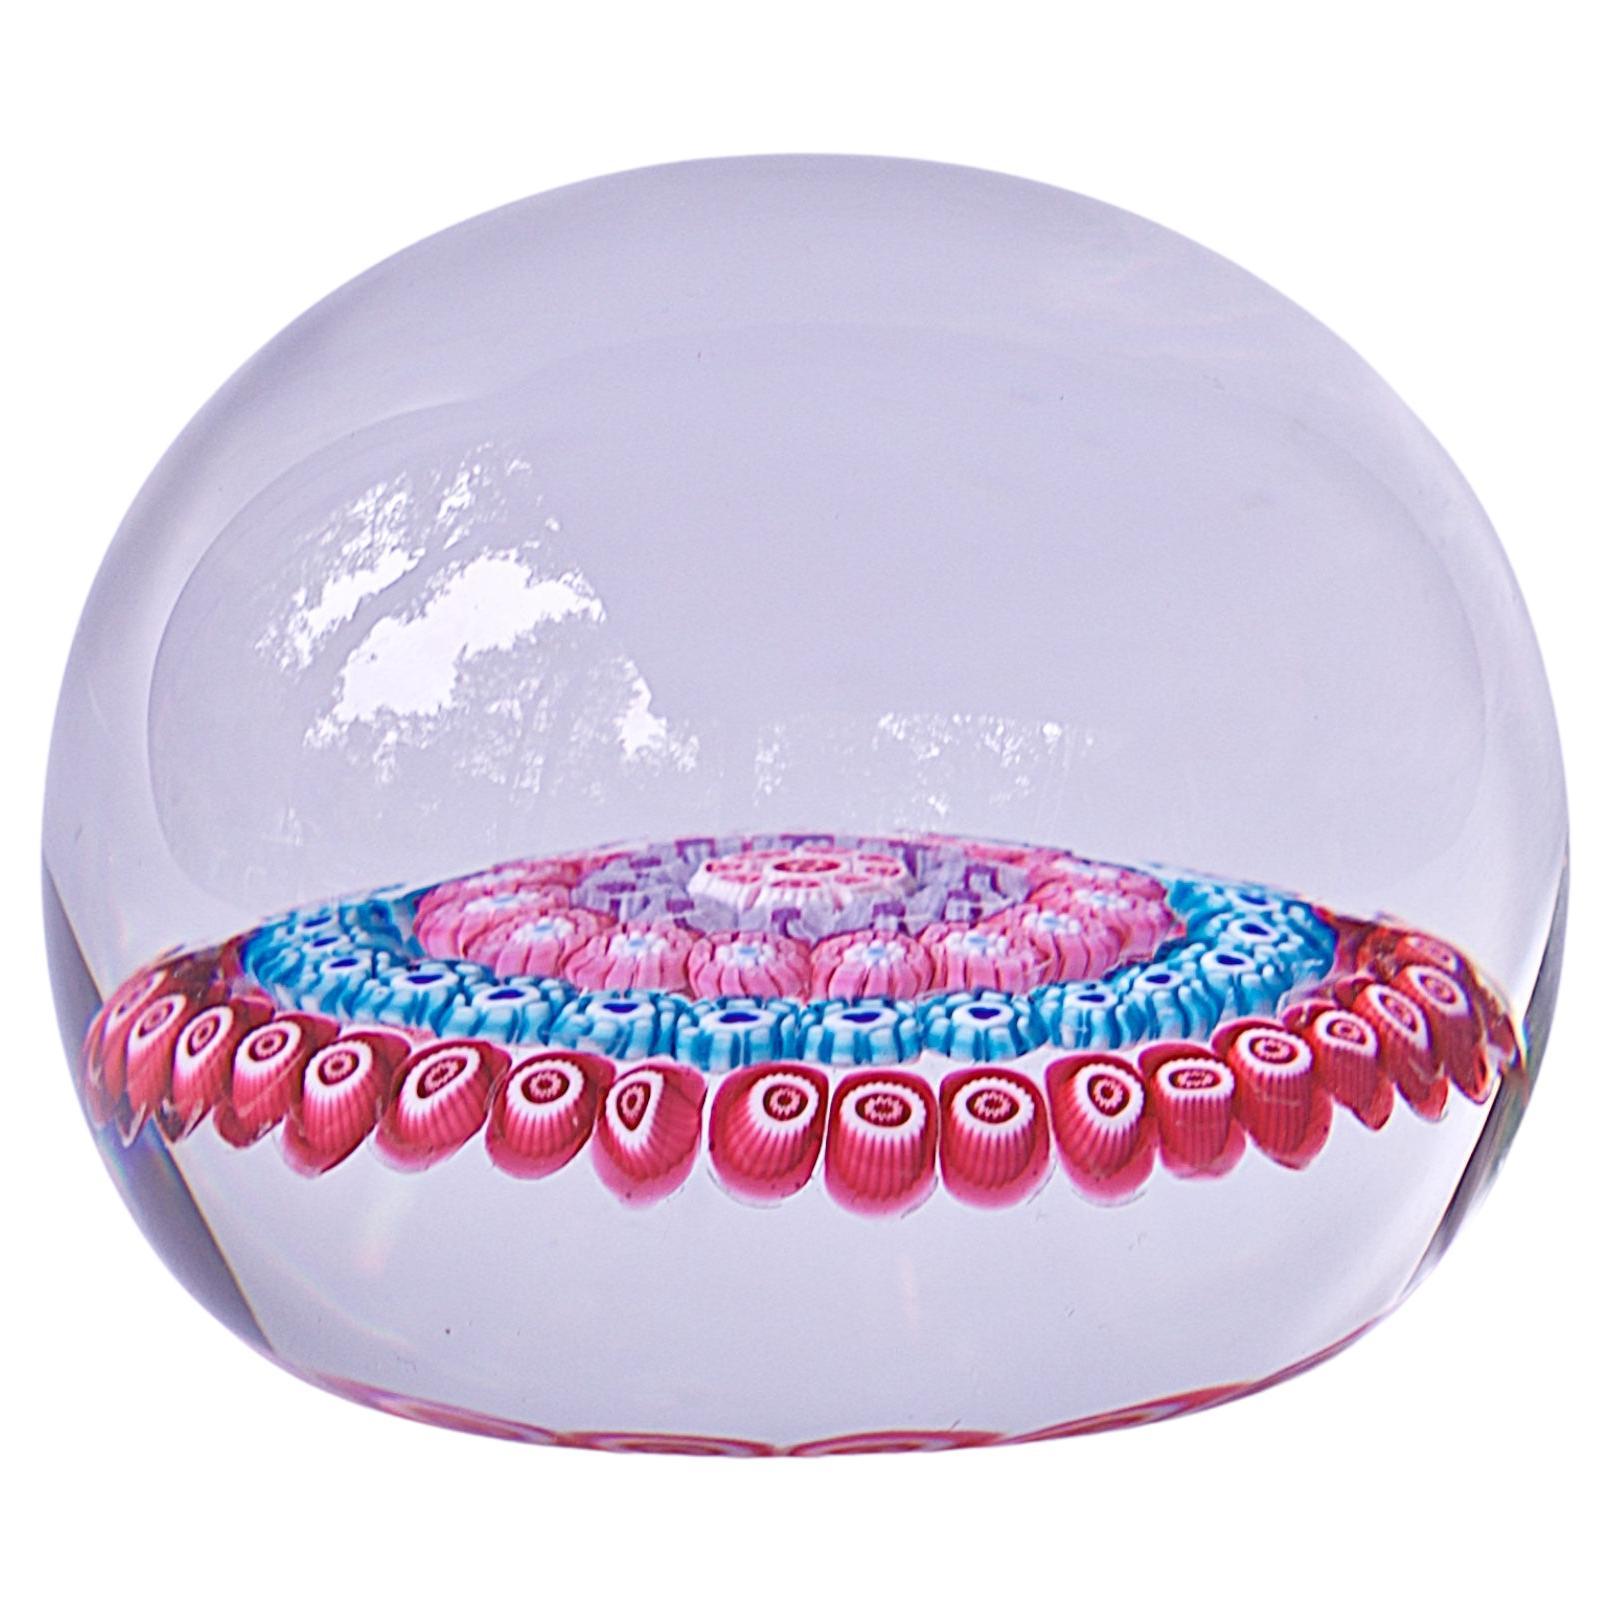 Louis Vuitton Paperweight - For Sale on 1stDibs